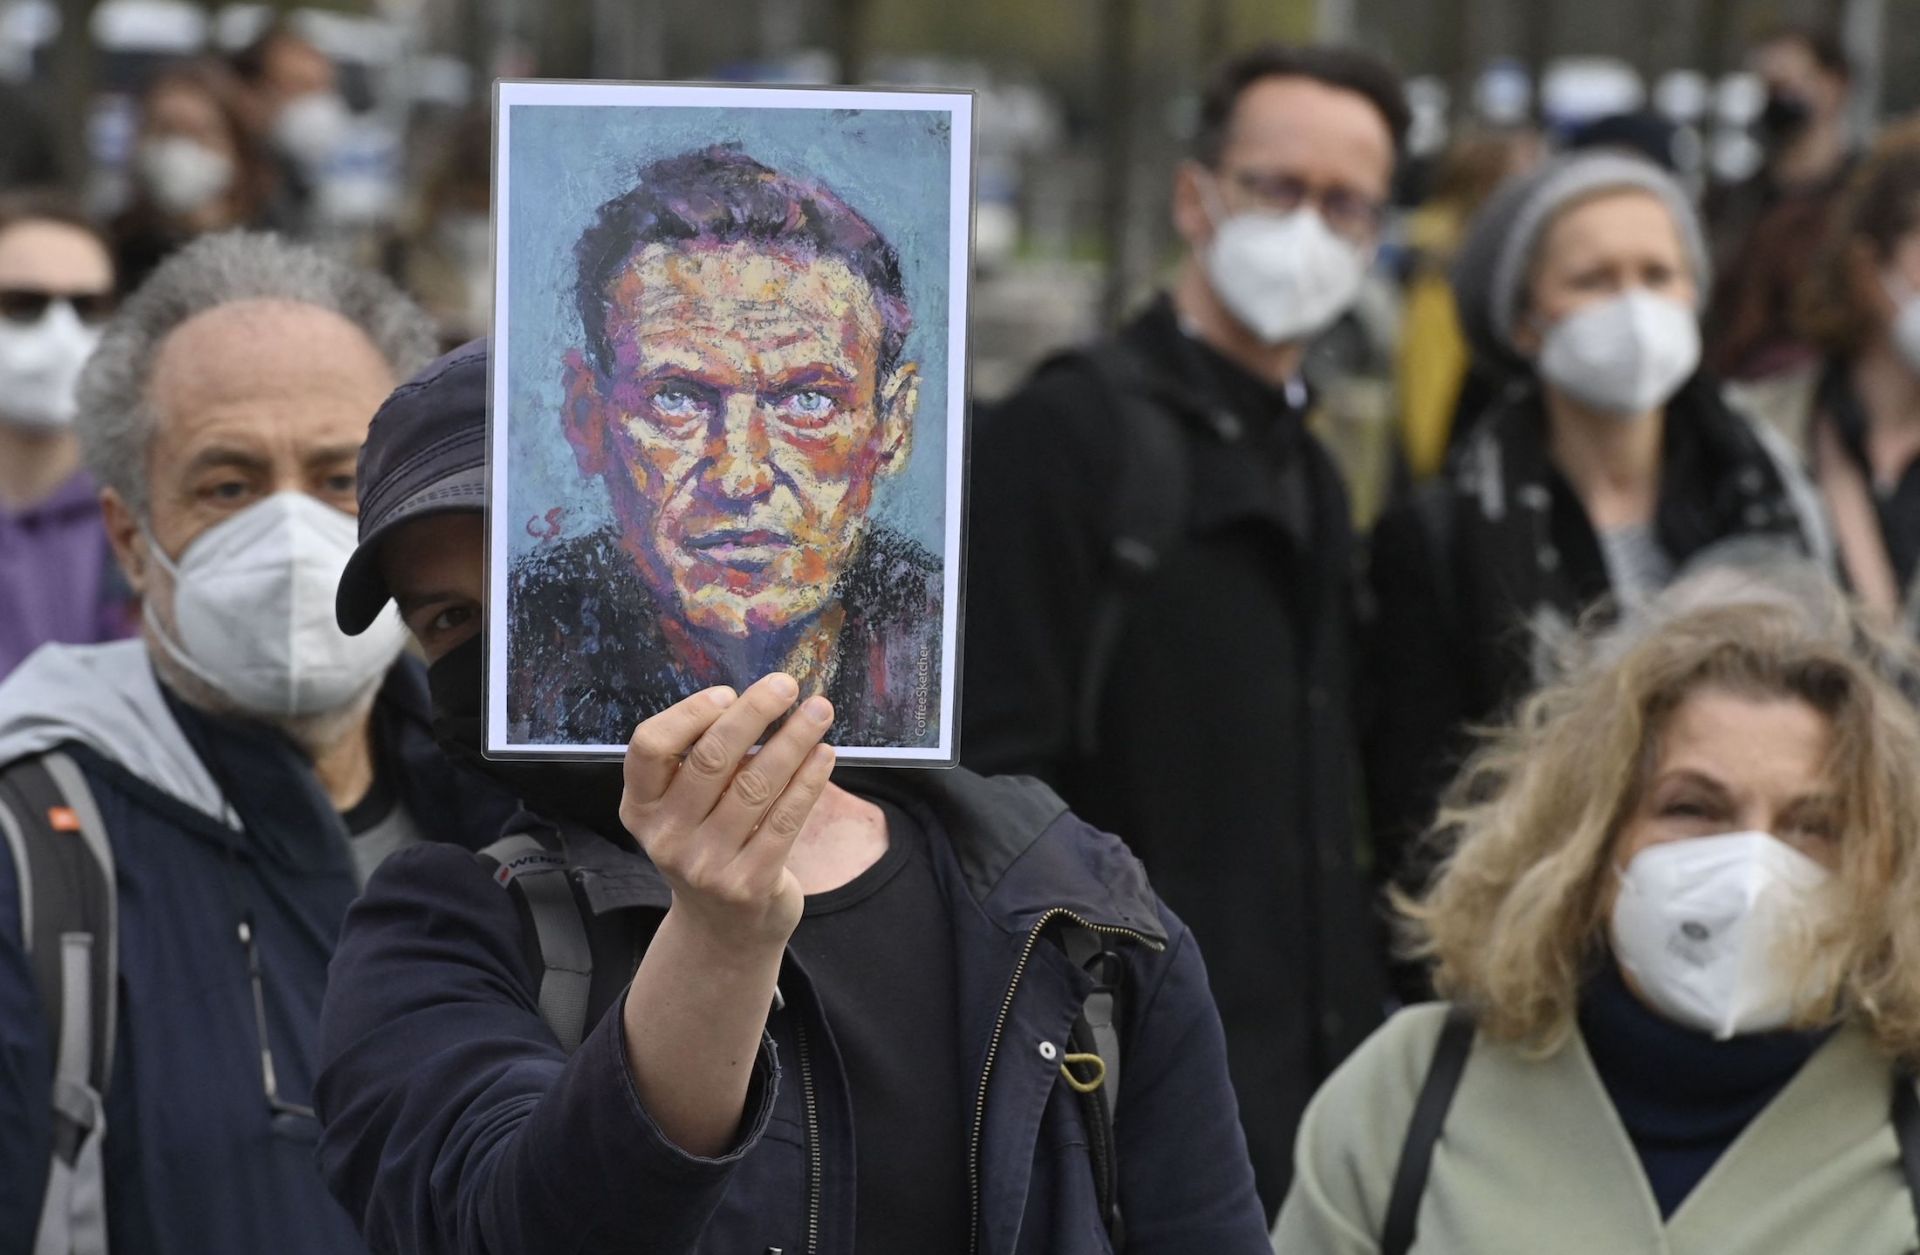 A demonstrator displays a portrait of Russian opposition leader Alexei Navalny during a protest in Berlin, Germany, on April 21, 2021.